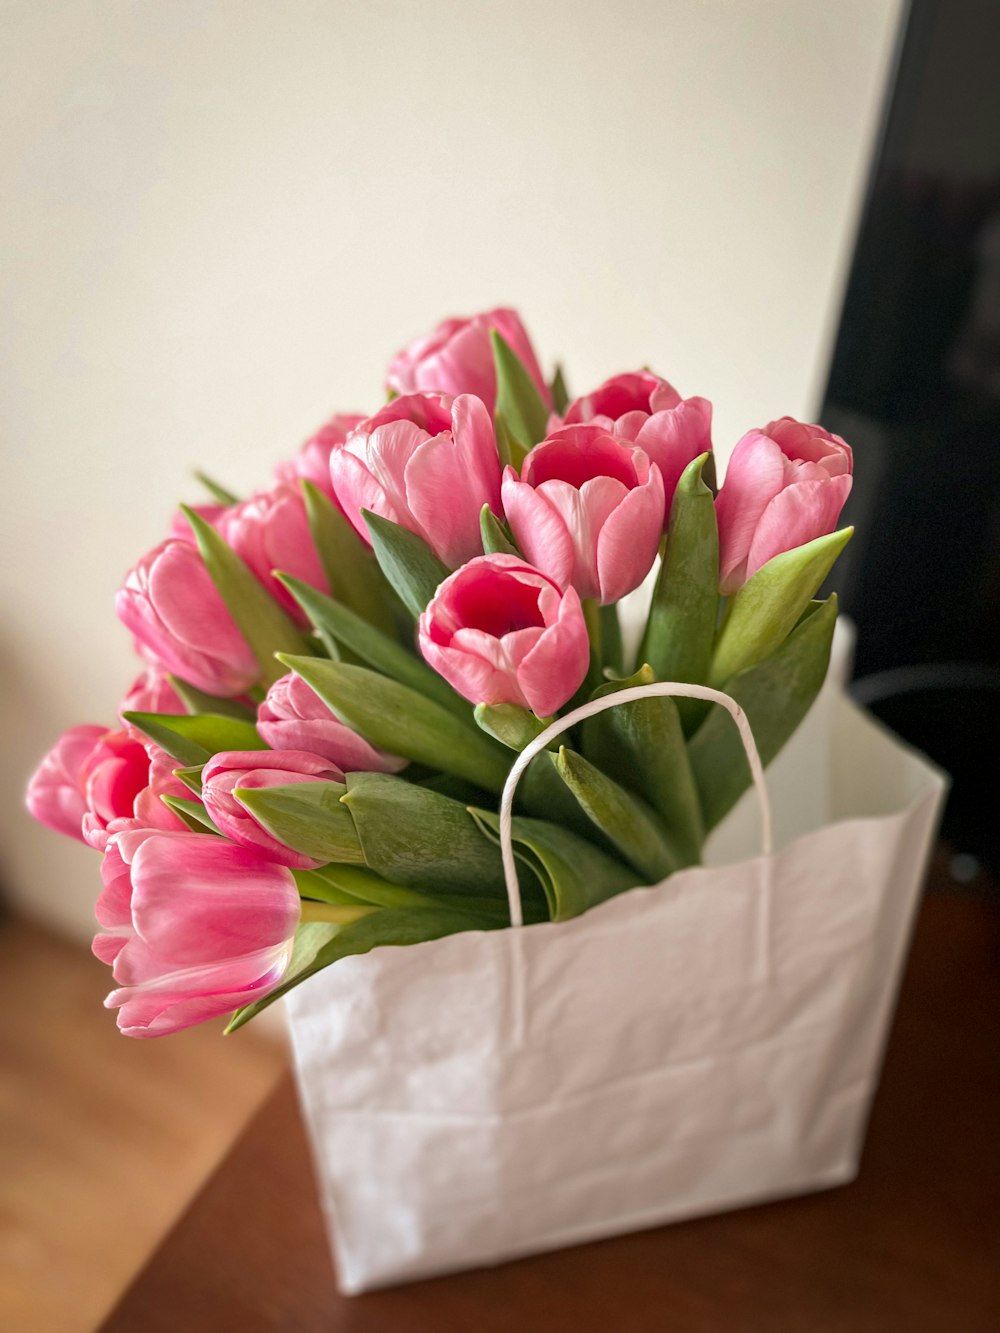 a bouquet of pink tulips in a white paper bag